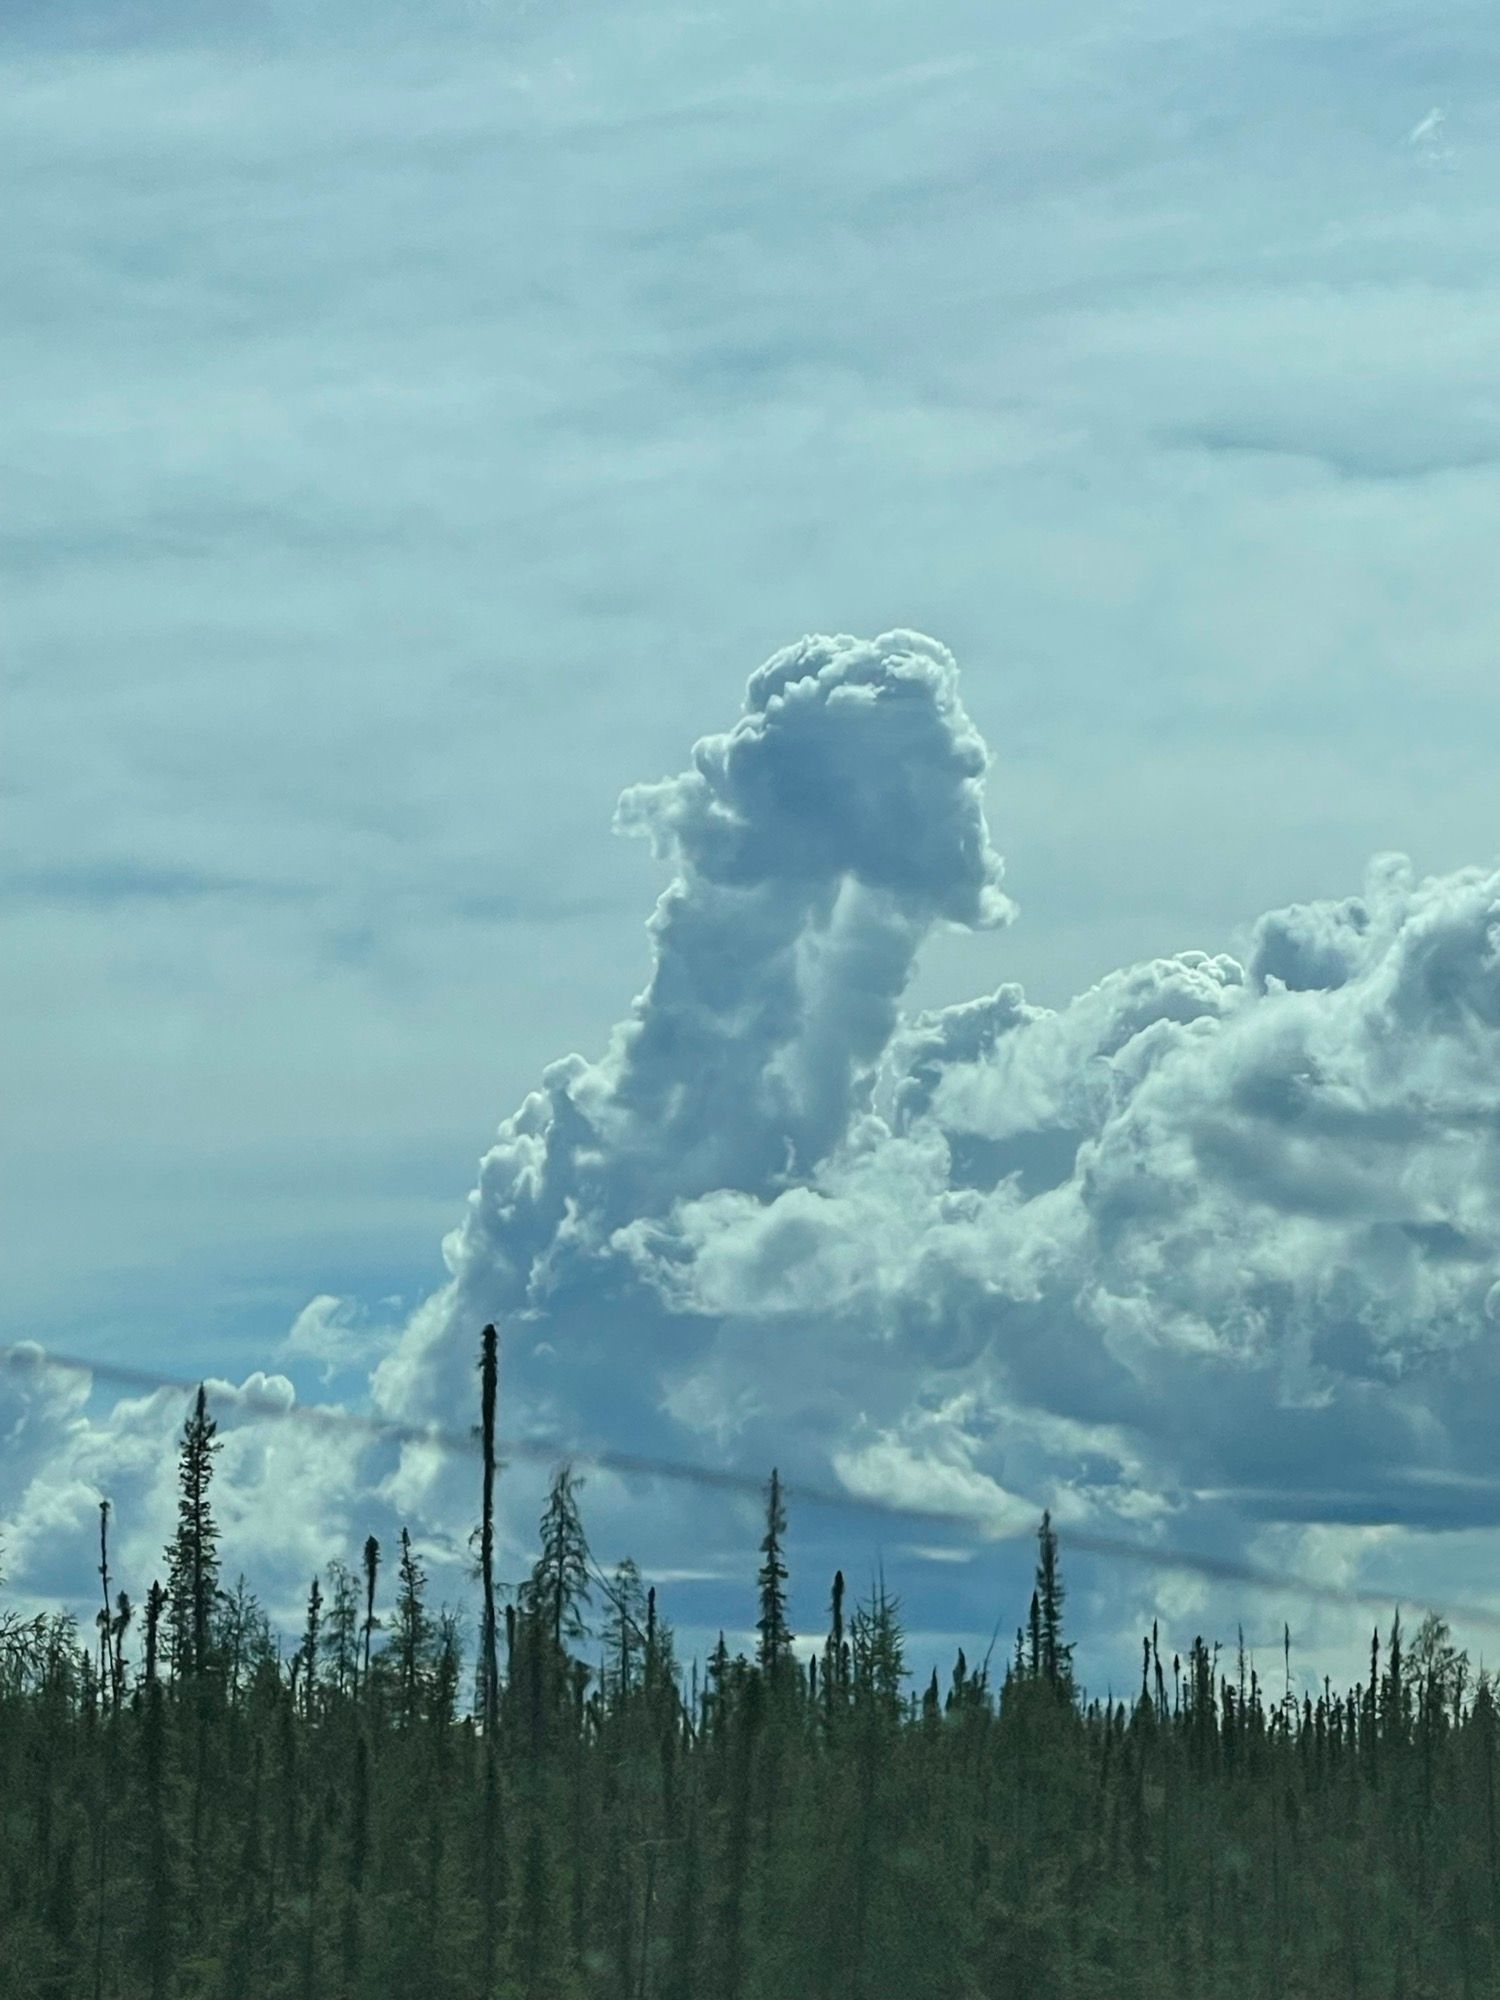 The James Webb telescope might have some cool images, but here is a penis cloud.